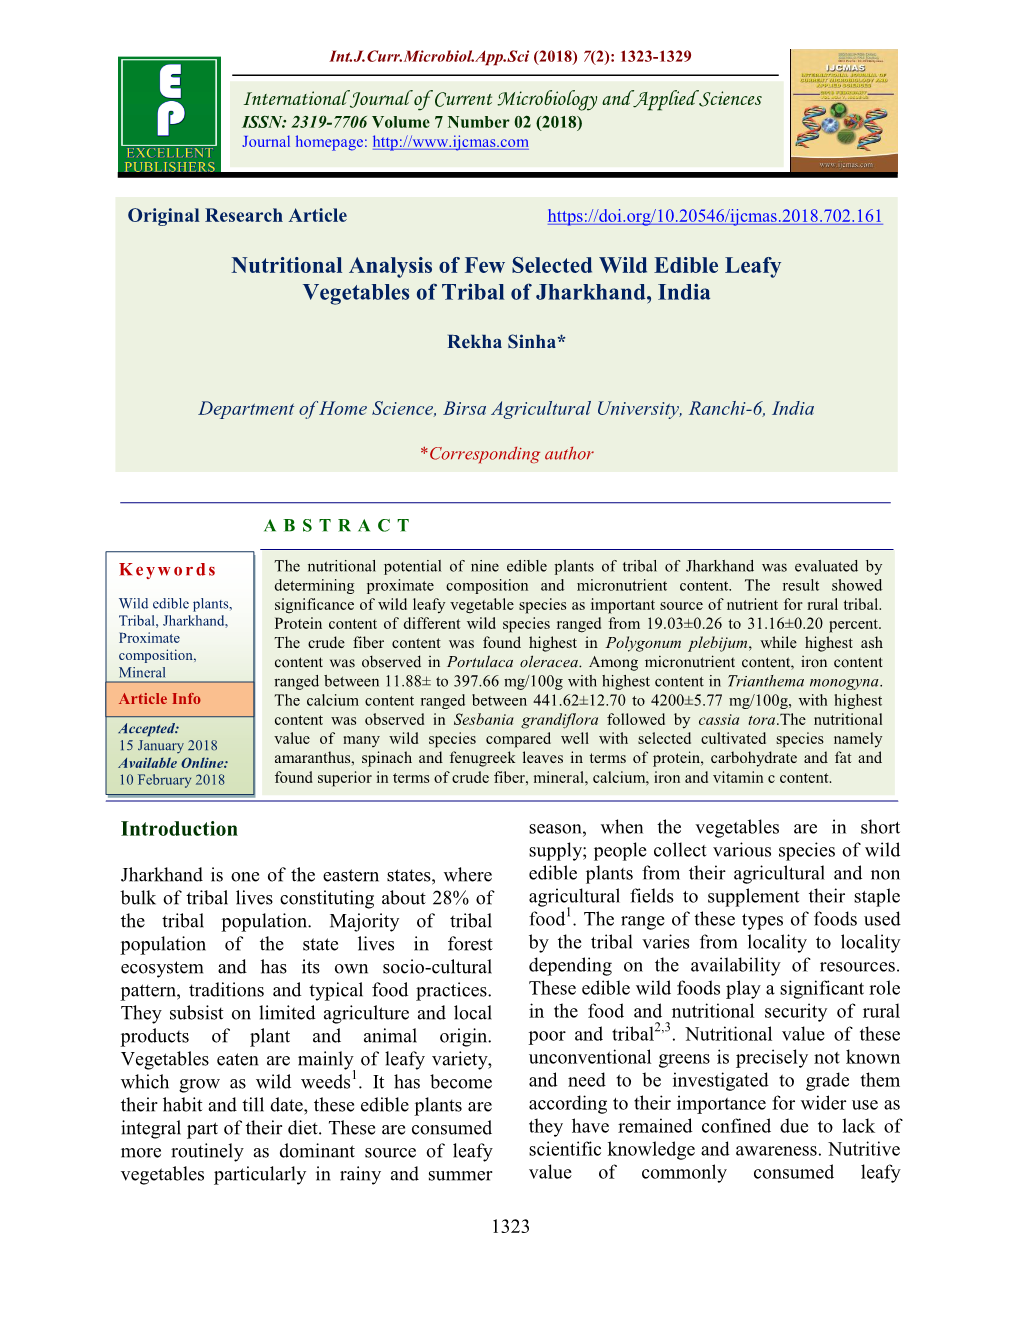 Nutritional Analysis of Few Selected Wild Edible Leafy Vegetables of Tribal of Jharkhand, India